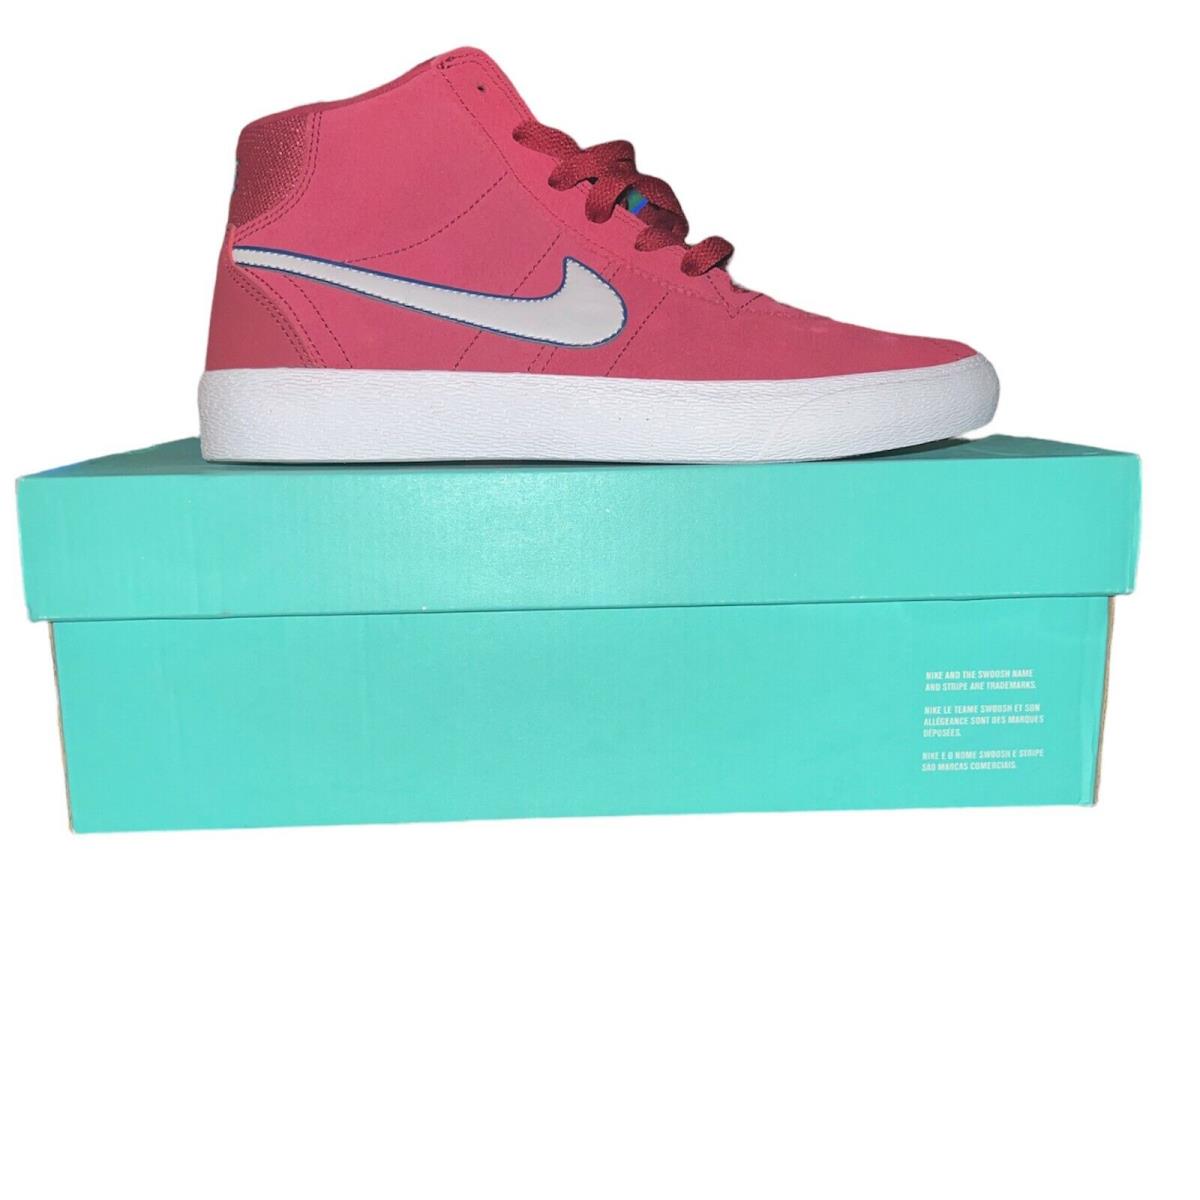 Nike Womens Sb Bruin Hi 923112 600 Red Gray Lace Up Skateboarding Shoes Size 8